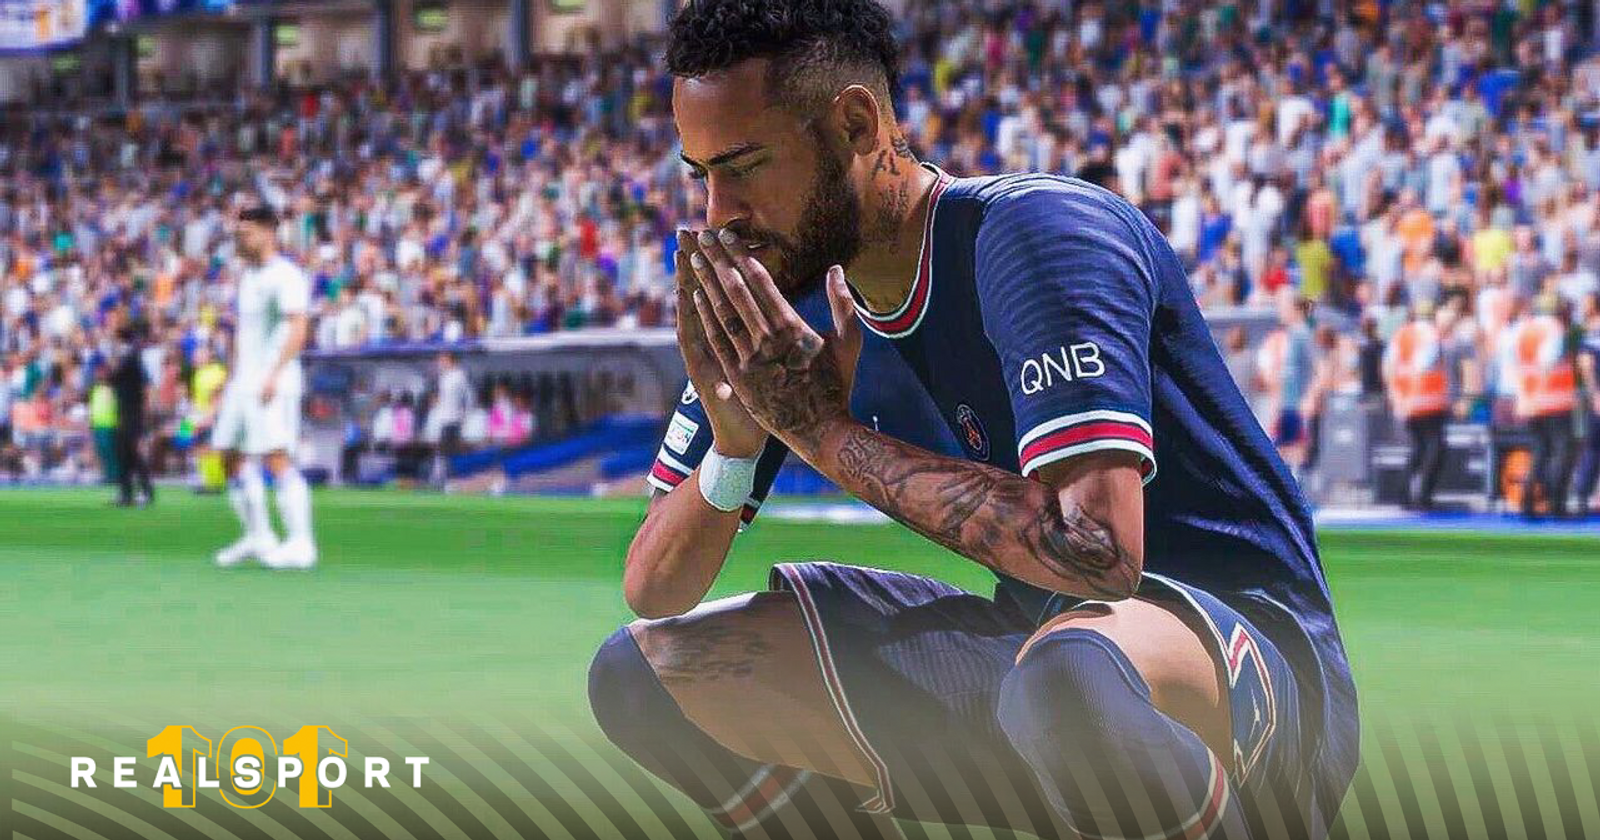 Here are all the FIFA 23 PS5, Xbox Series X and S, PC and Stadia exclusive  gameplay features